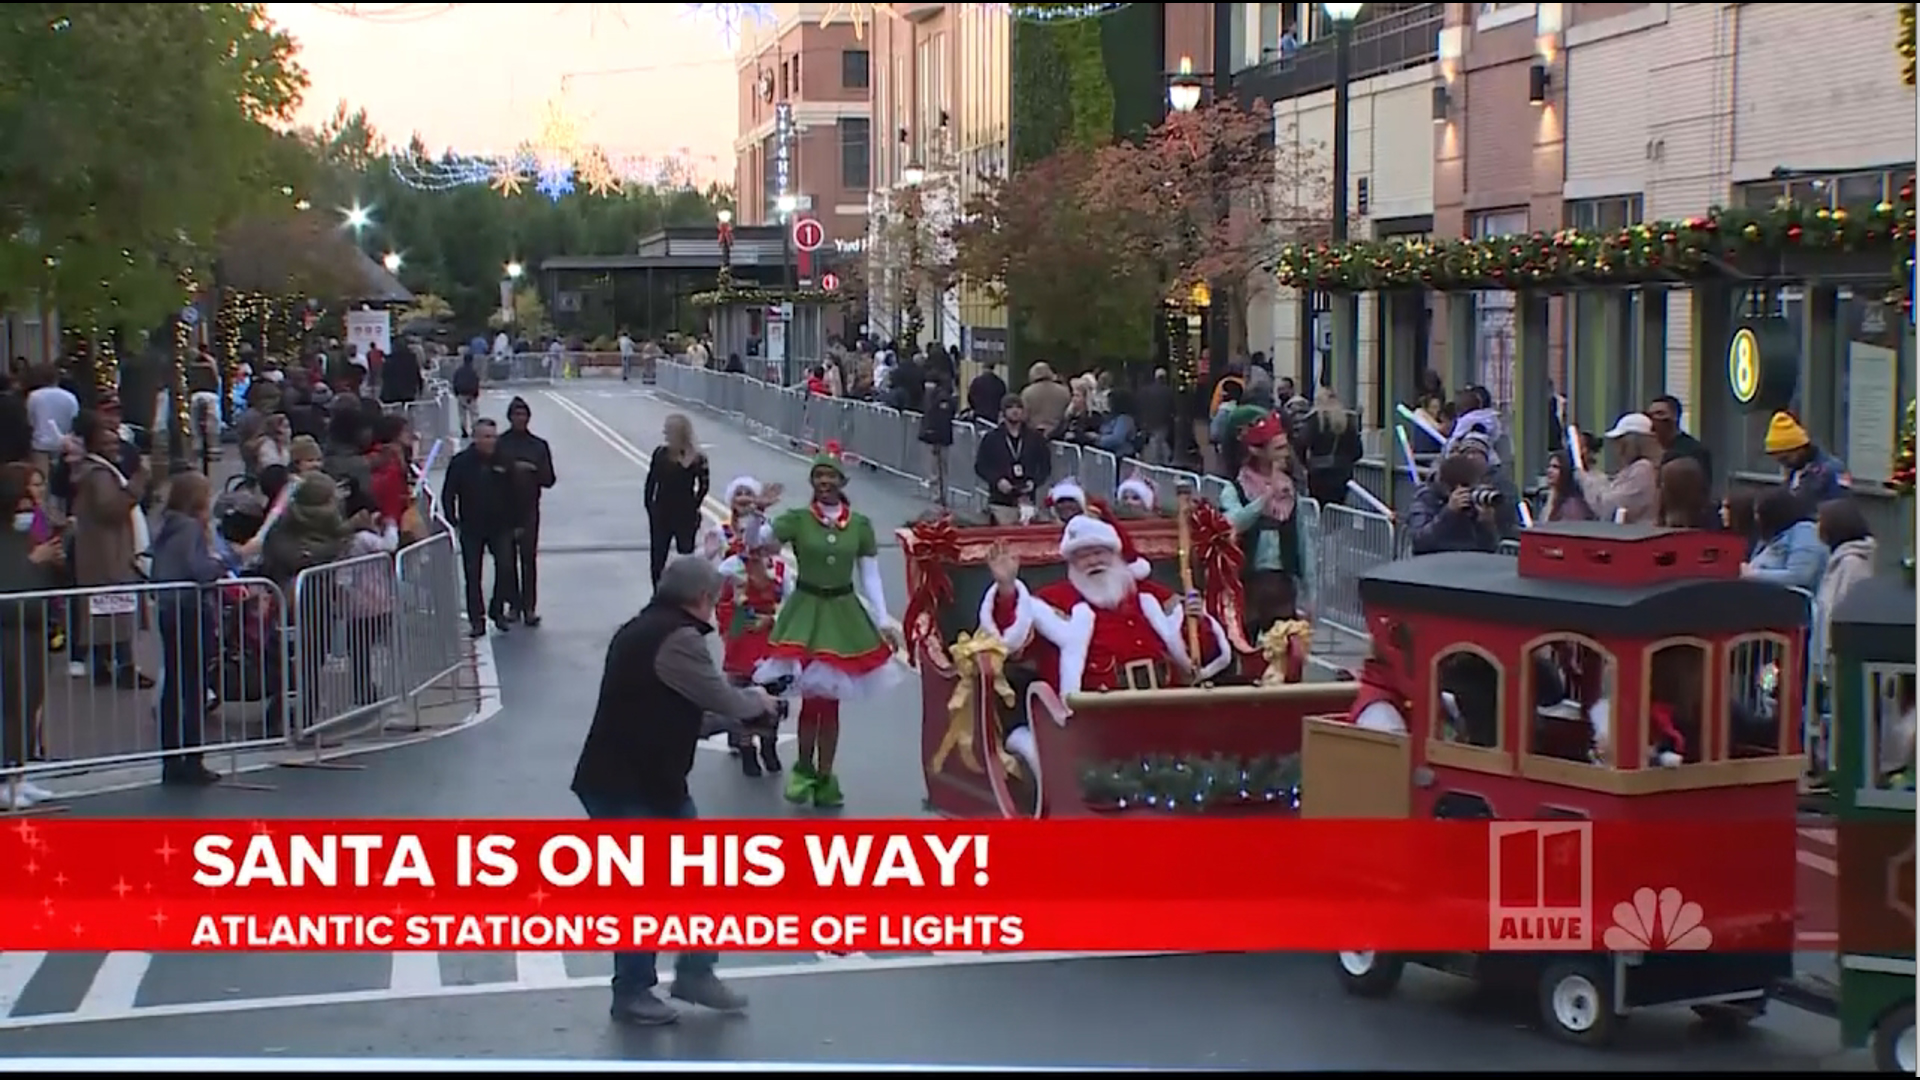 Enjoy all the fun acts parading through Atlantic Station as Christine Pullara and Cara Kneer host the Parade of Lights.